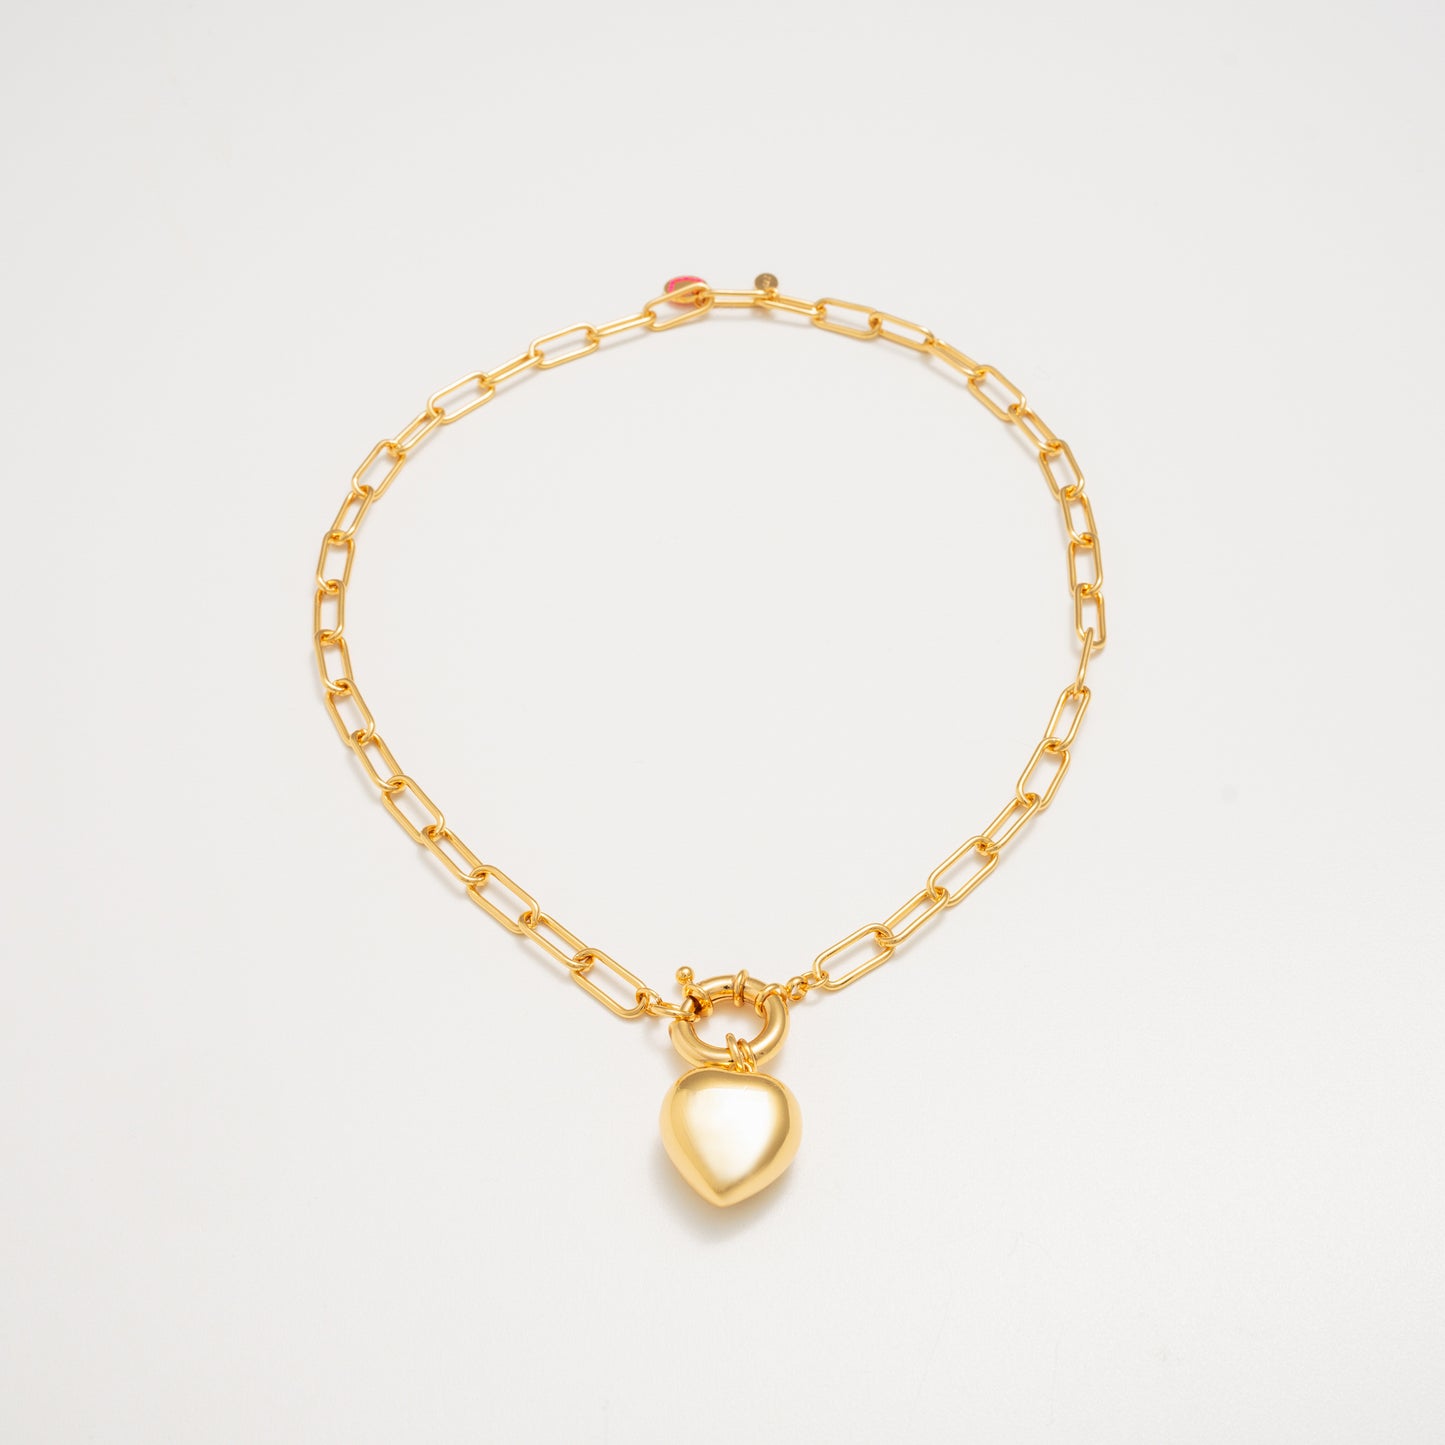 Lonely heart Necklace - Gold